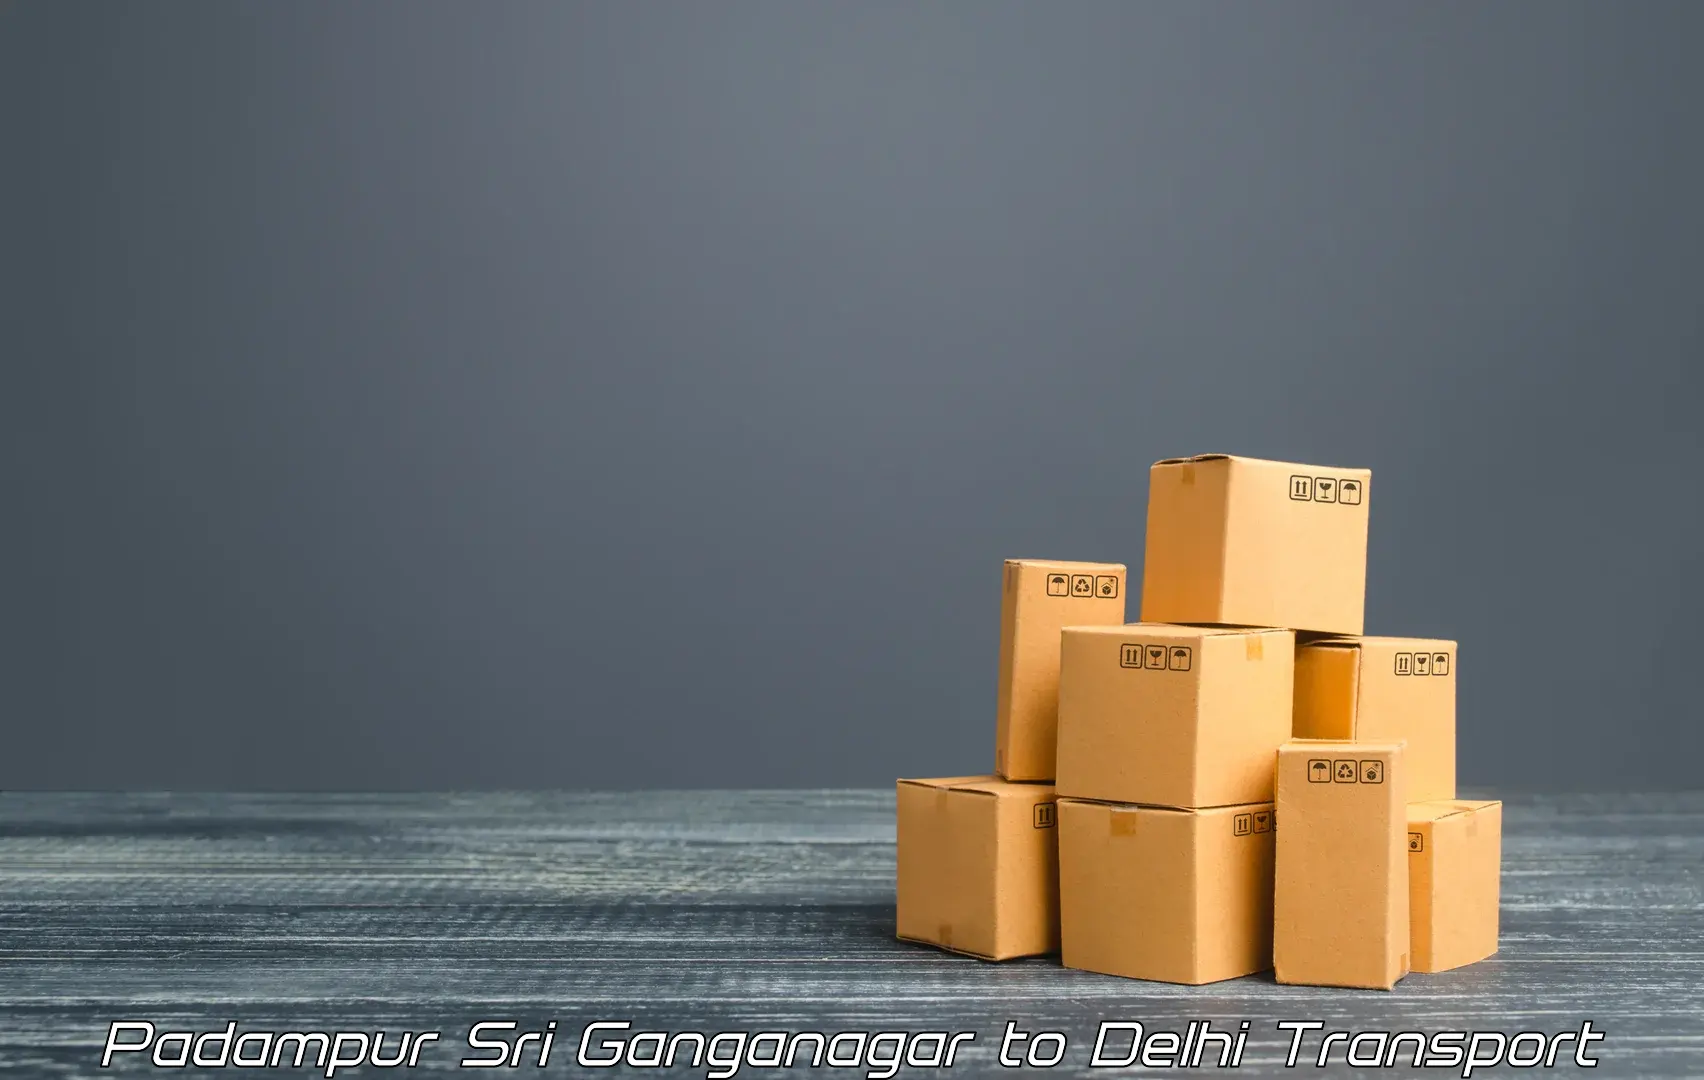 Package delivery services Padampur Sri Ganganagar to IIT Delhi